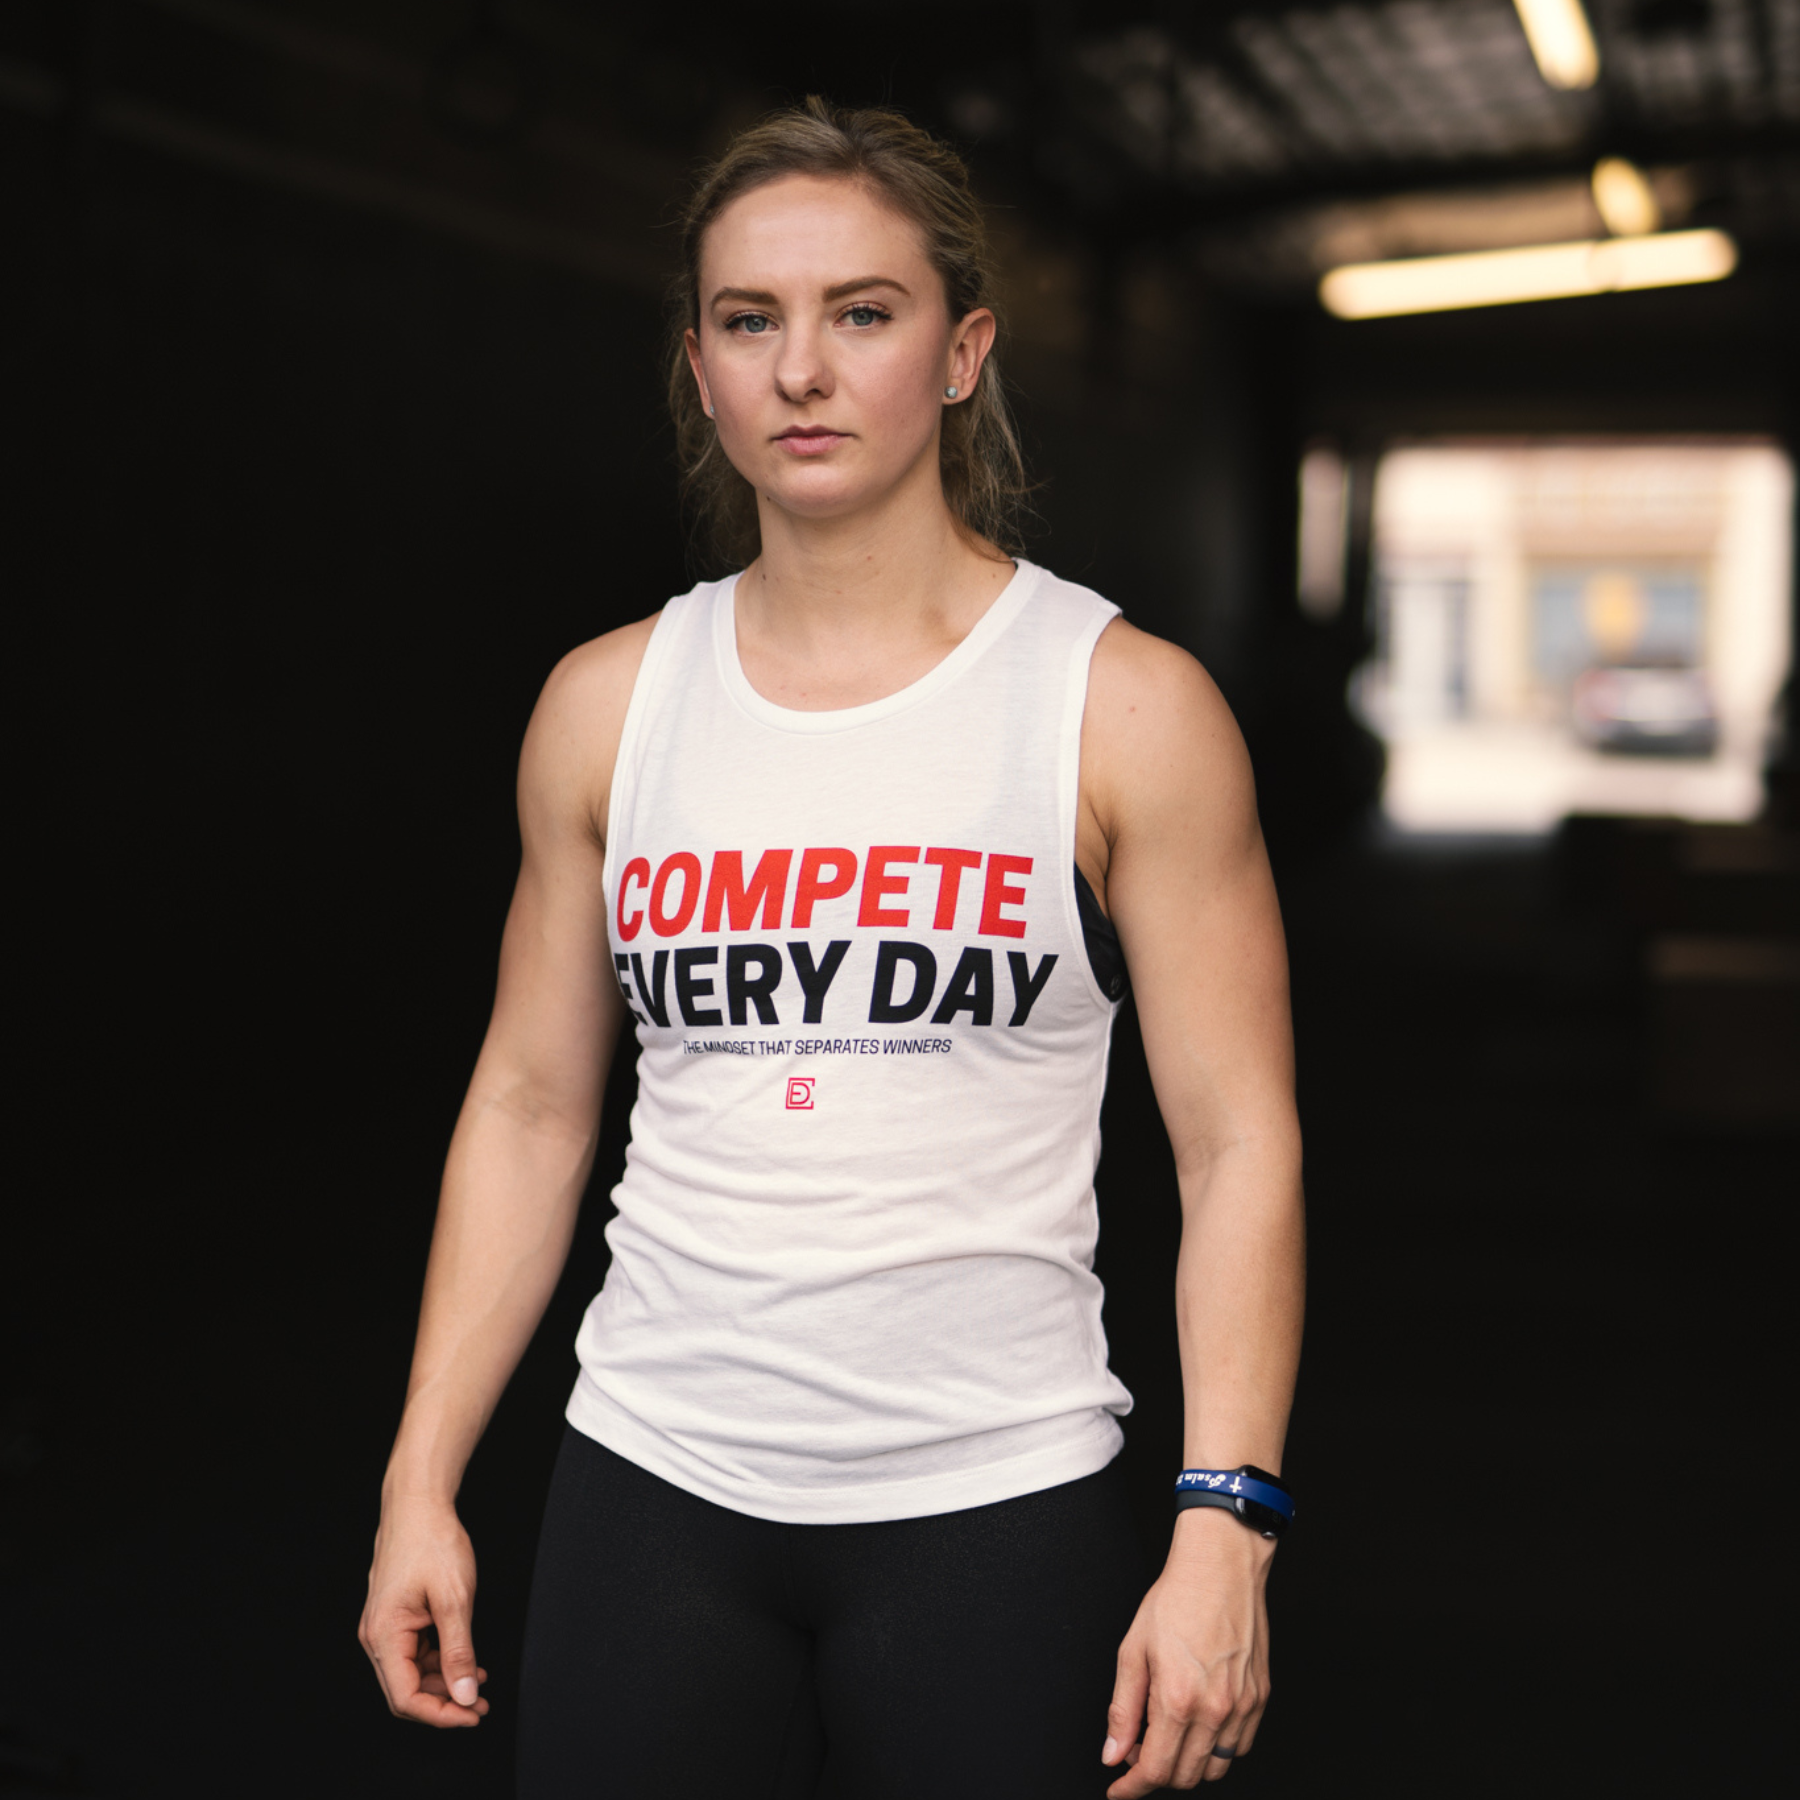 Compete Every Day Mentality Women's Tanktop